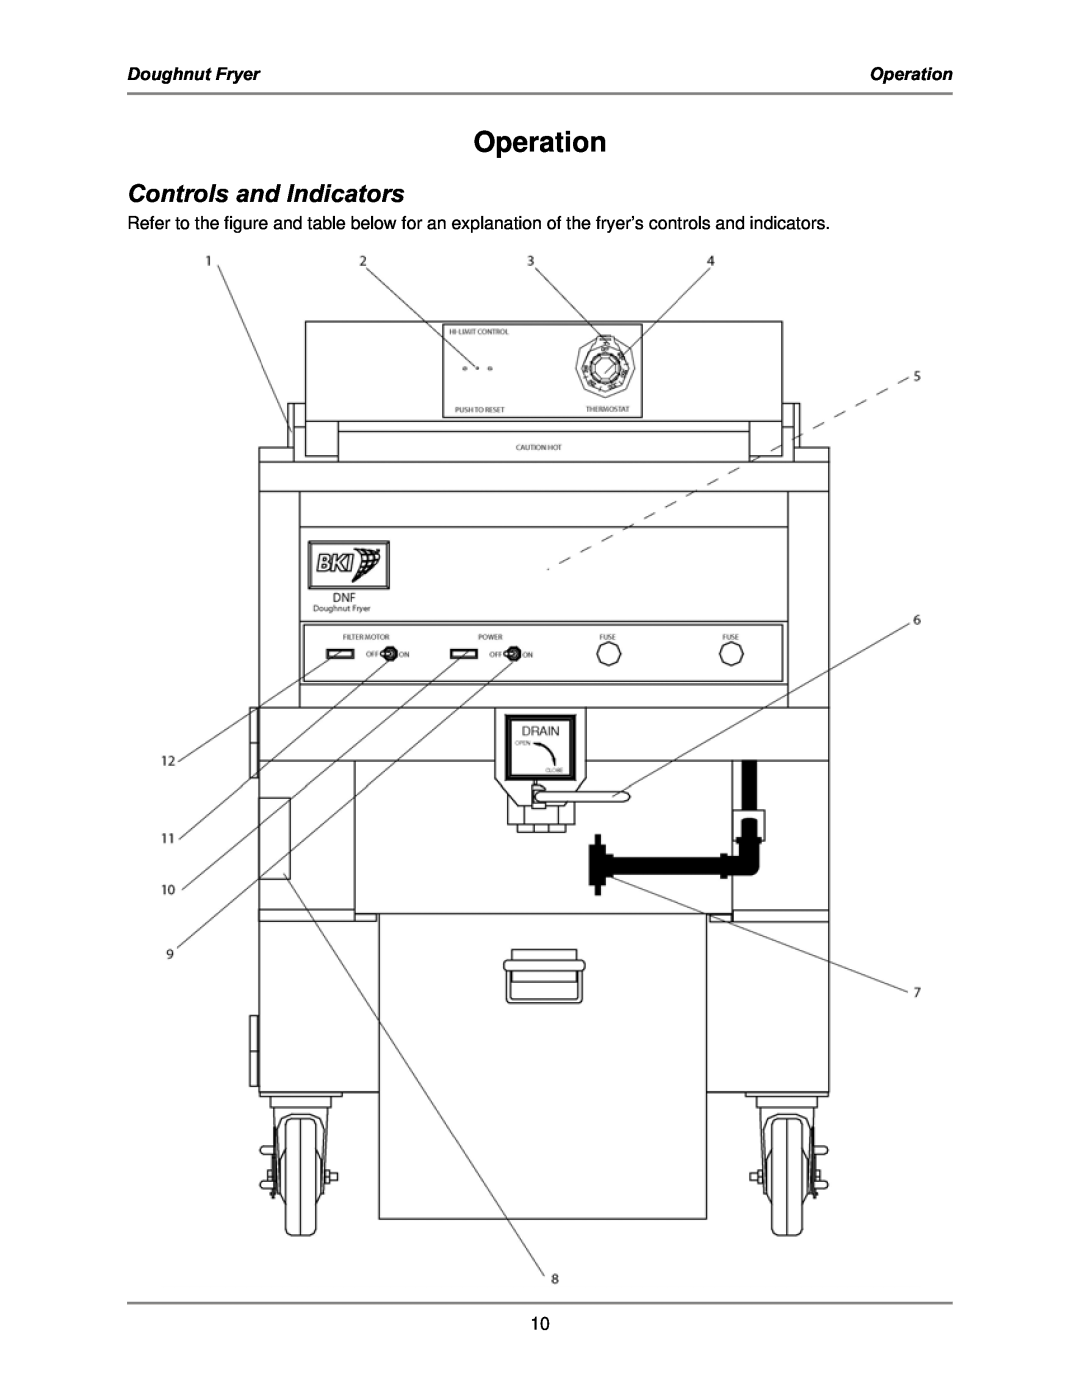 Bakers Pride Oven DNF-F operation manual Operation, Controls and Indicators, Doughnut Fryer 